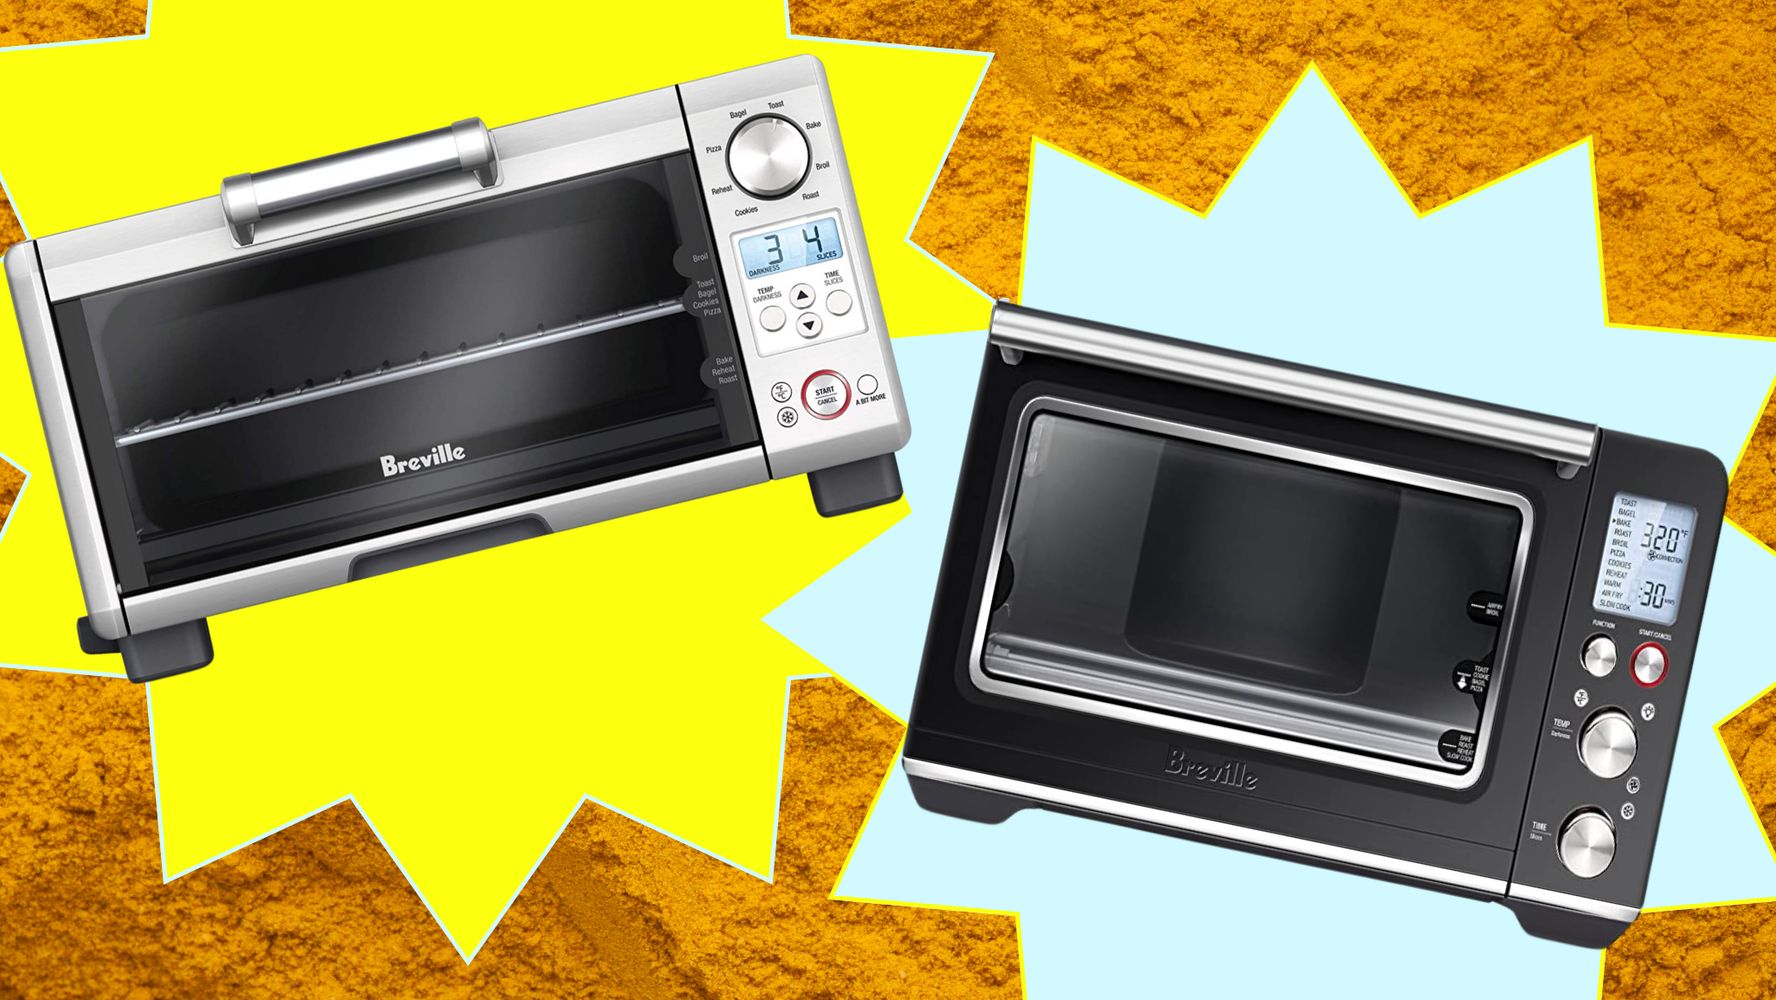 Breville's Smart Toaster Ovens Are Up To 36% Off At